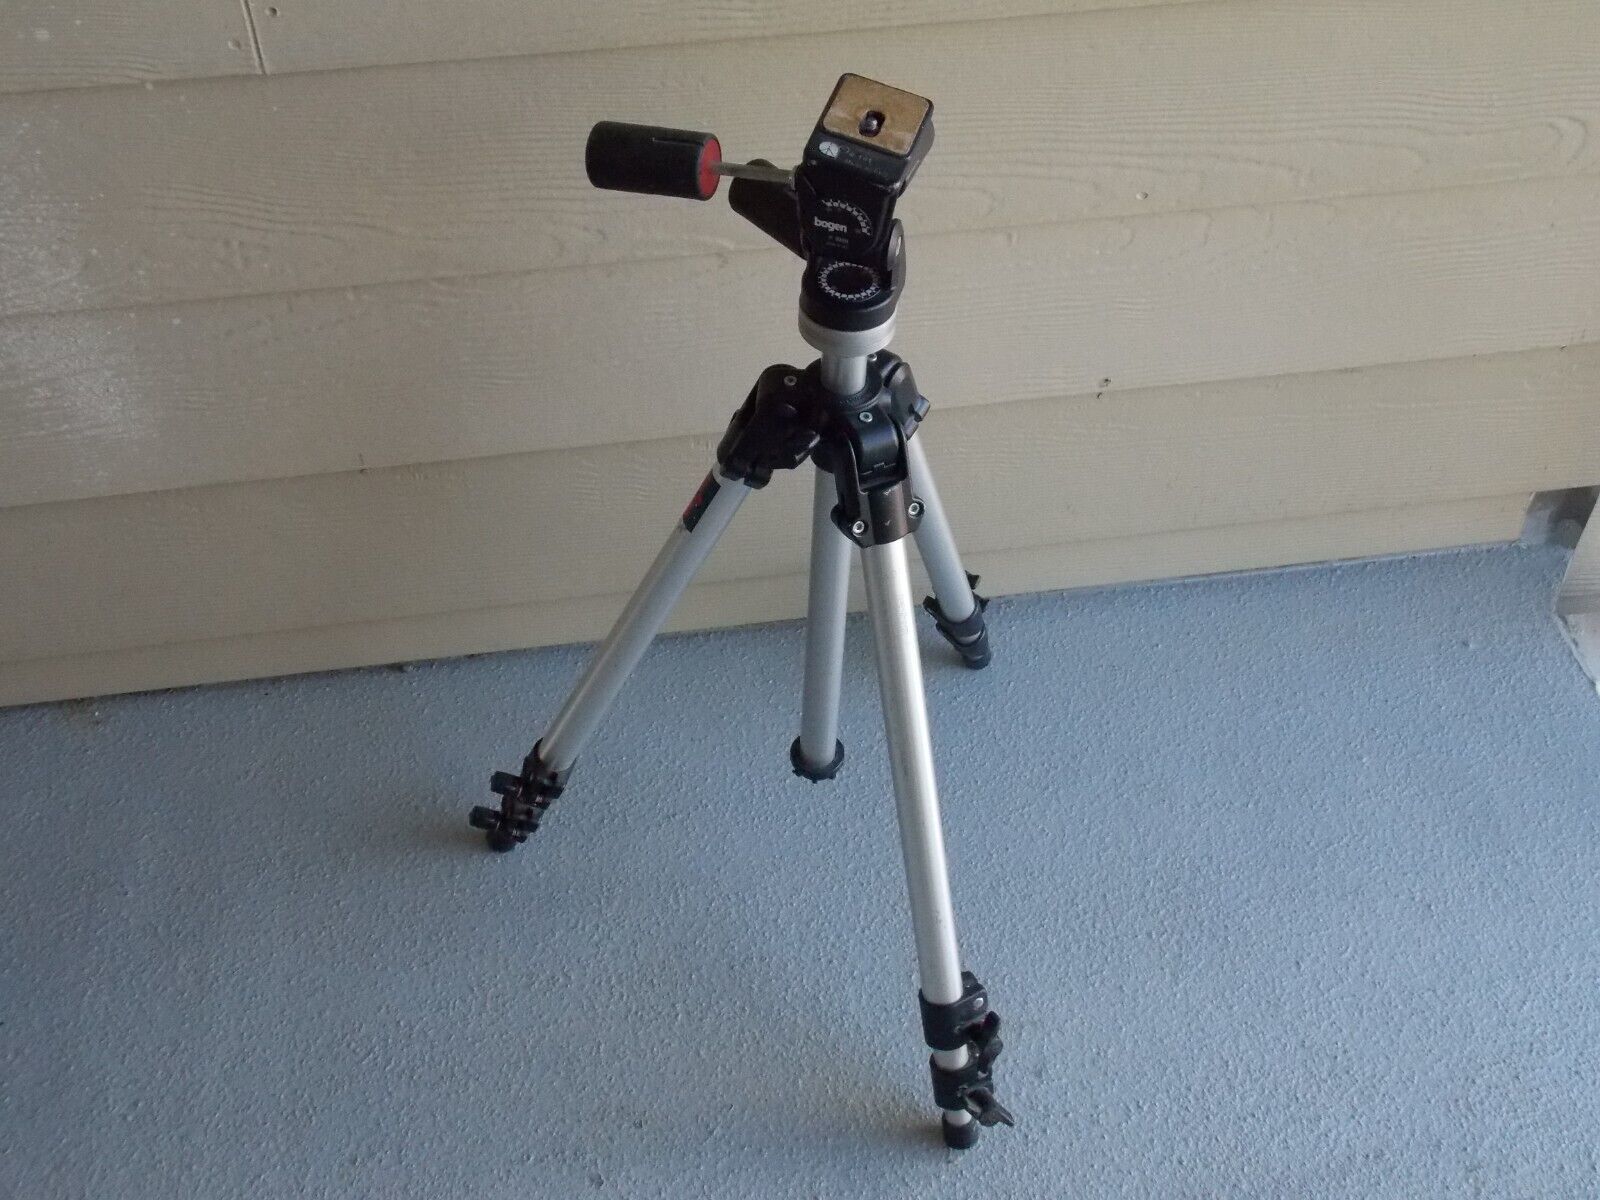 Bogen 3011 Tripod With Bogen 3029 pan tilt Head Made In Italy by Manfrotto - $79.99